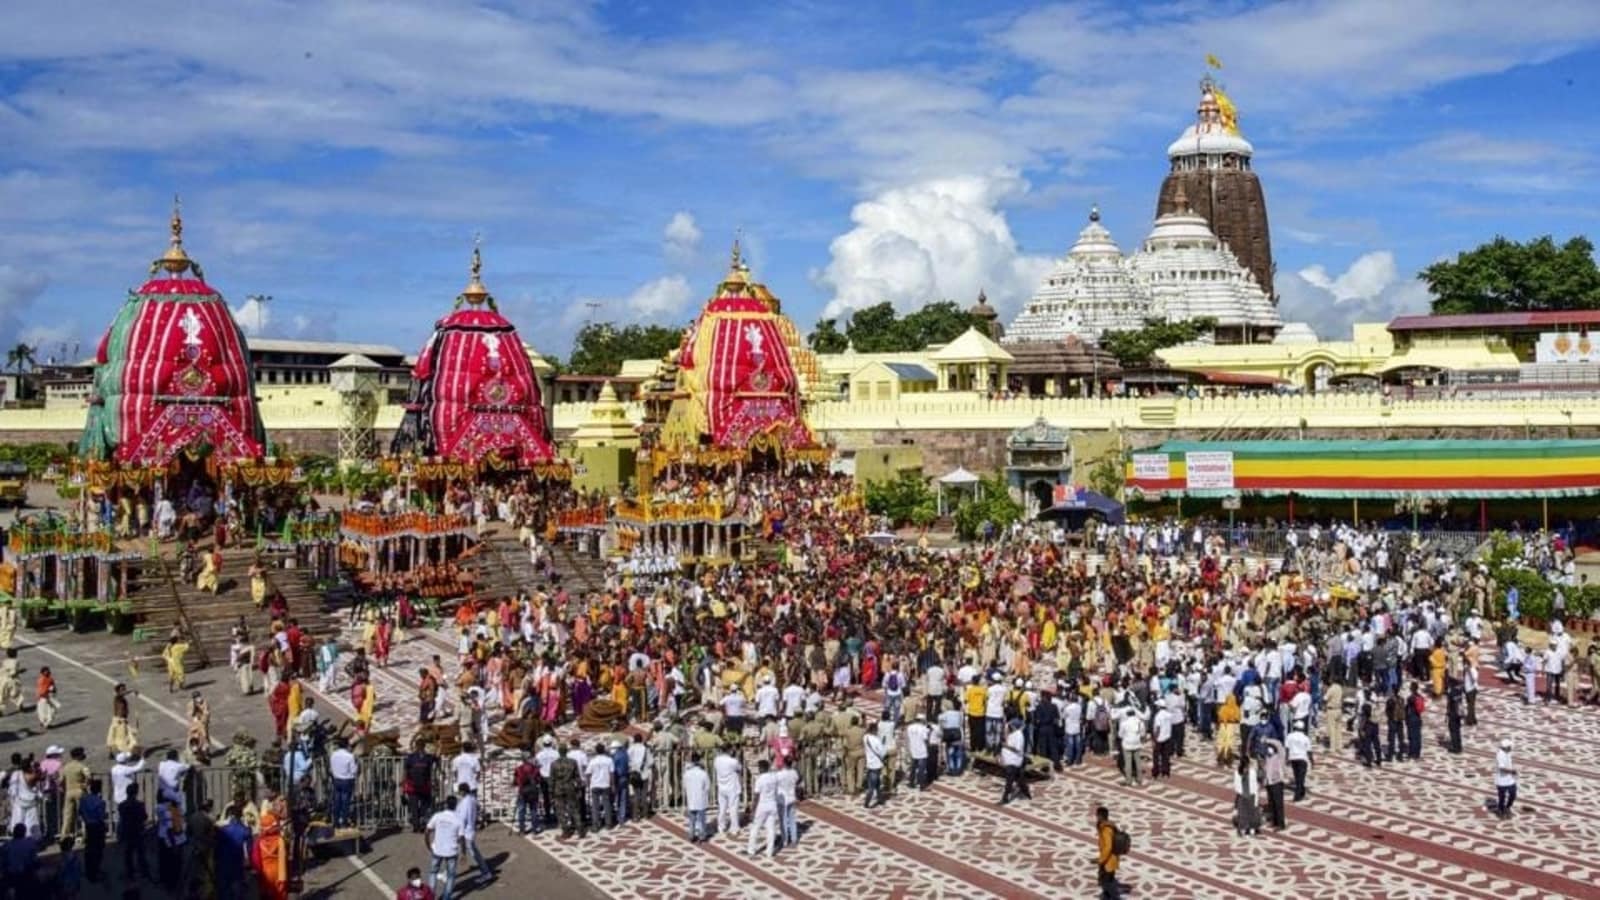 Puri's Jagannath temple reopens, public to get entry from Aug 23 | Latest  News India - Hindustan Times